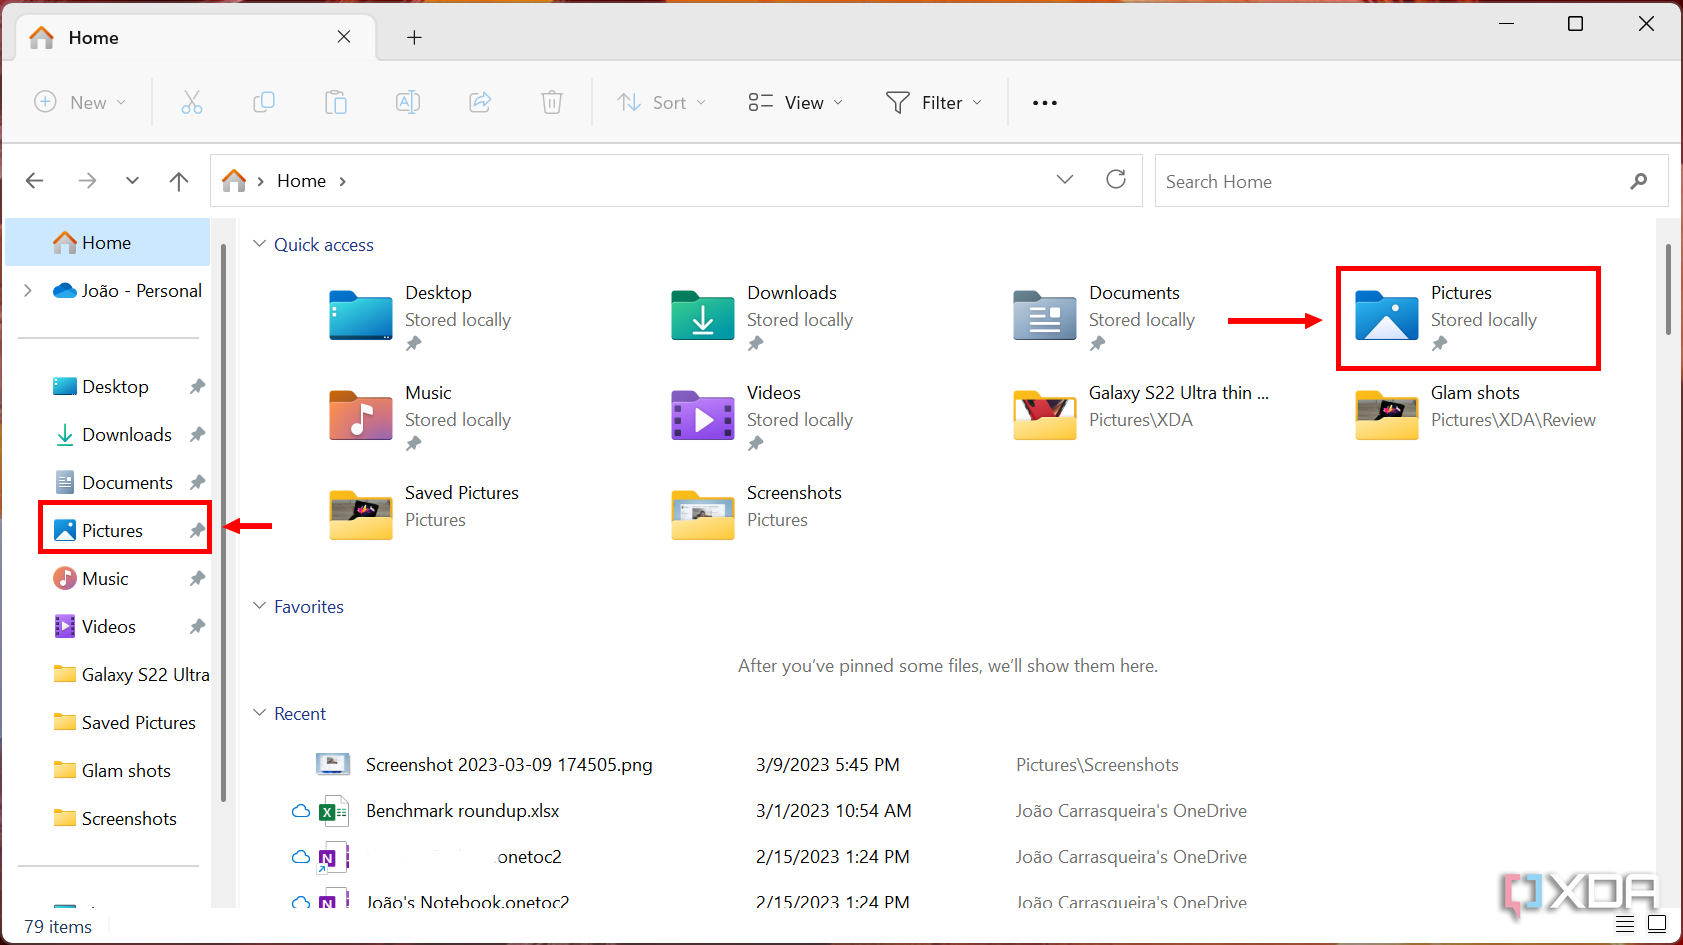 Screenshot of the Windows 11 File Explorer home page with the Pictures folder highlighted